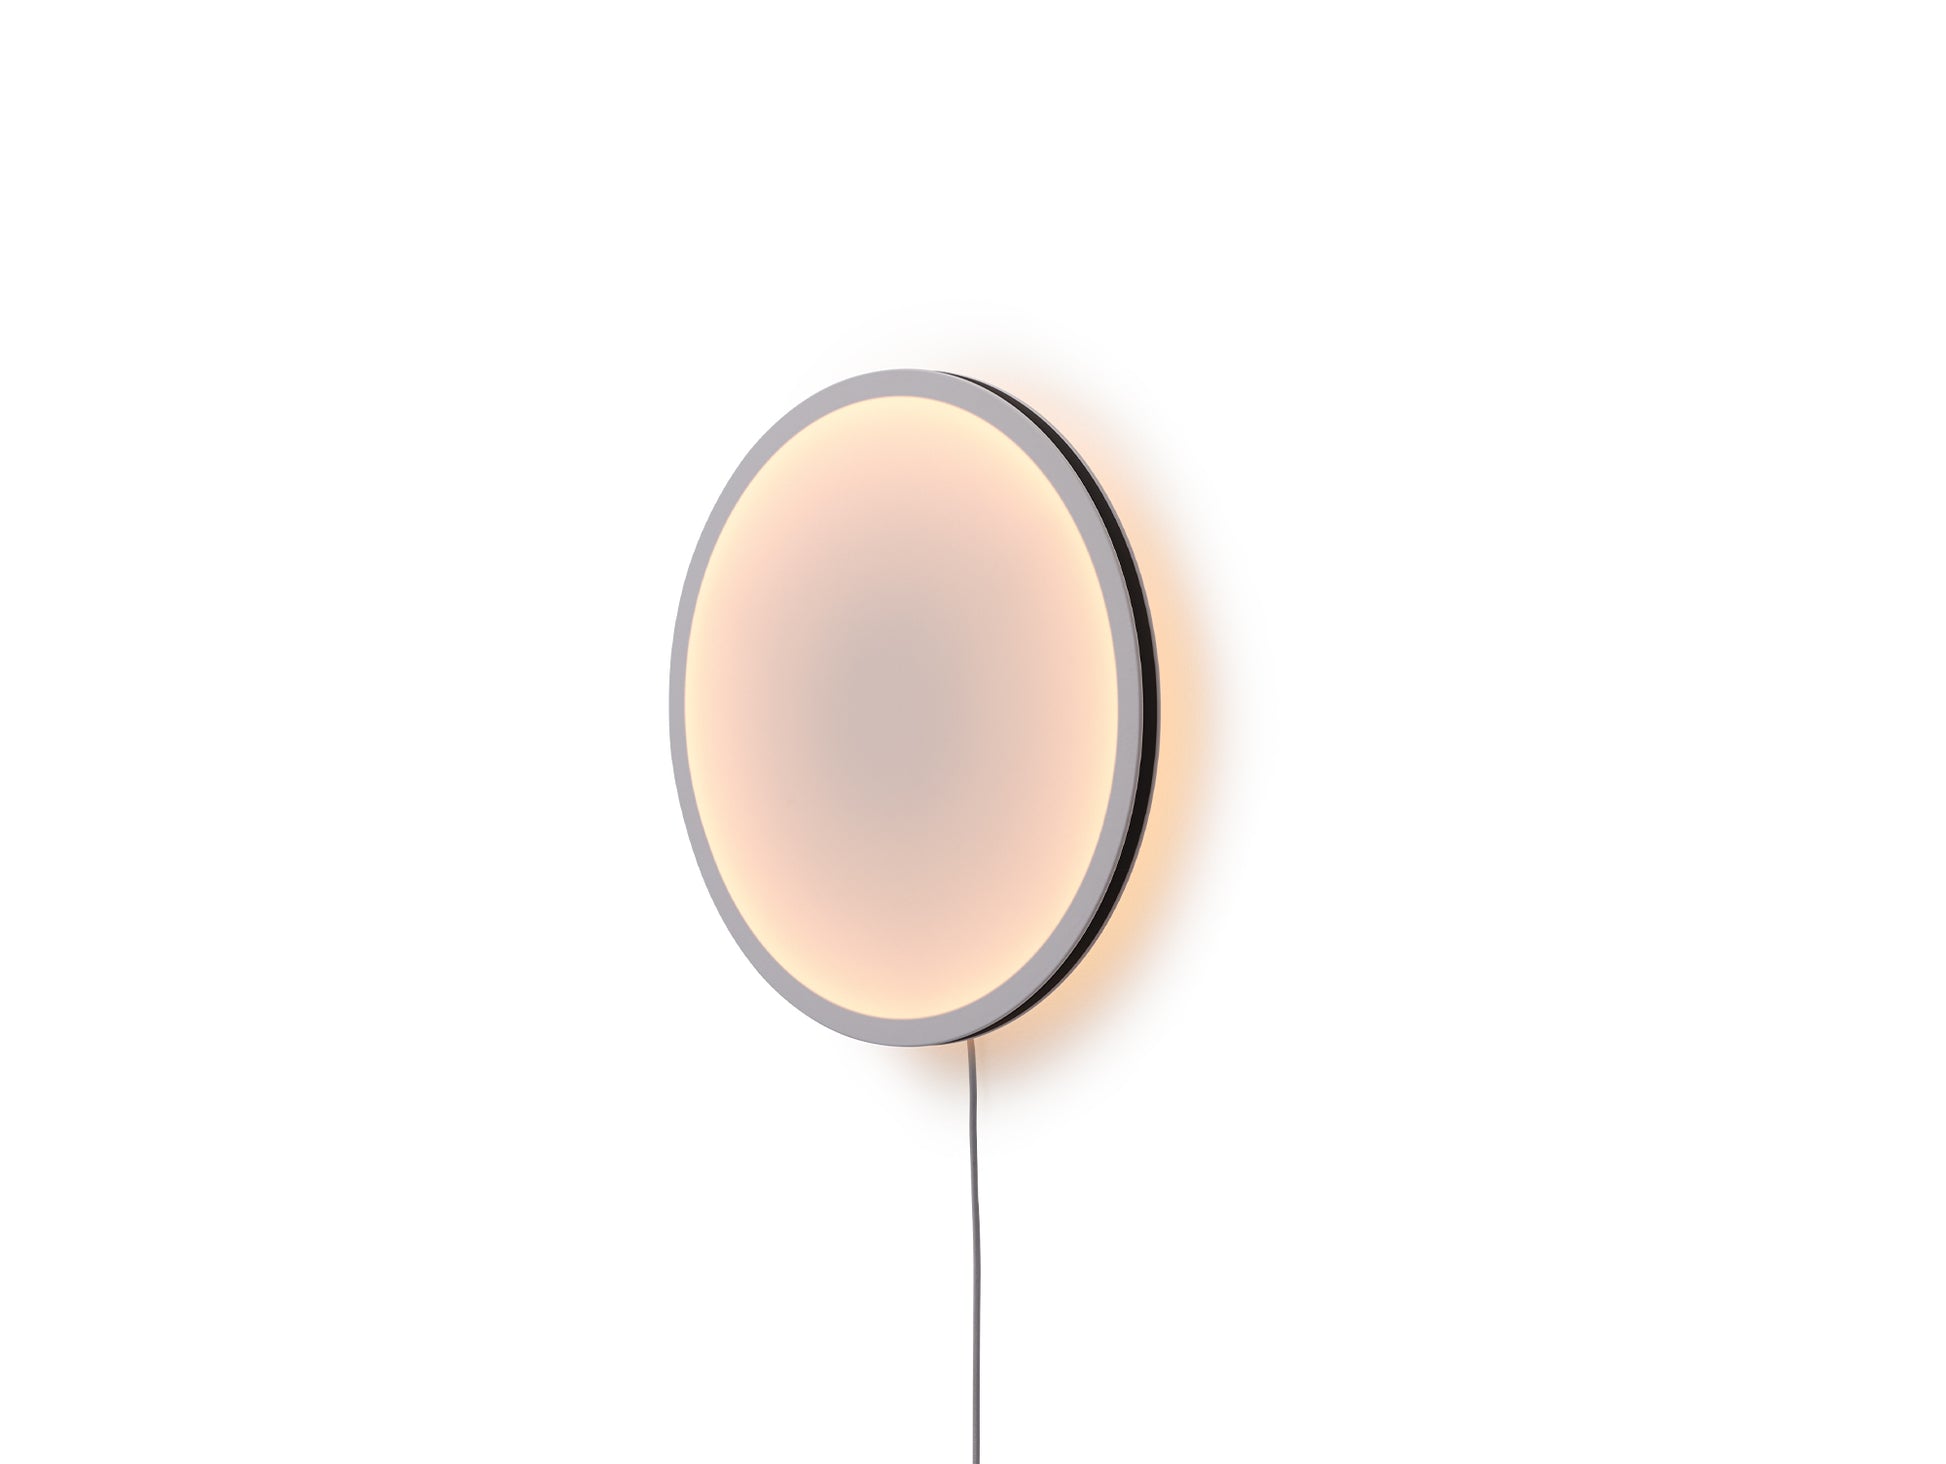 Calm Wall Lamp by Muuto - D50 cm / With an Inline Dimmer and Plug / White Shade / Black Edge